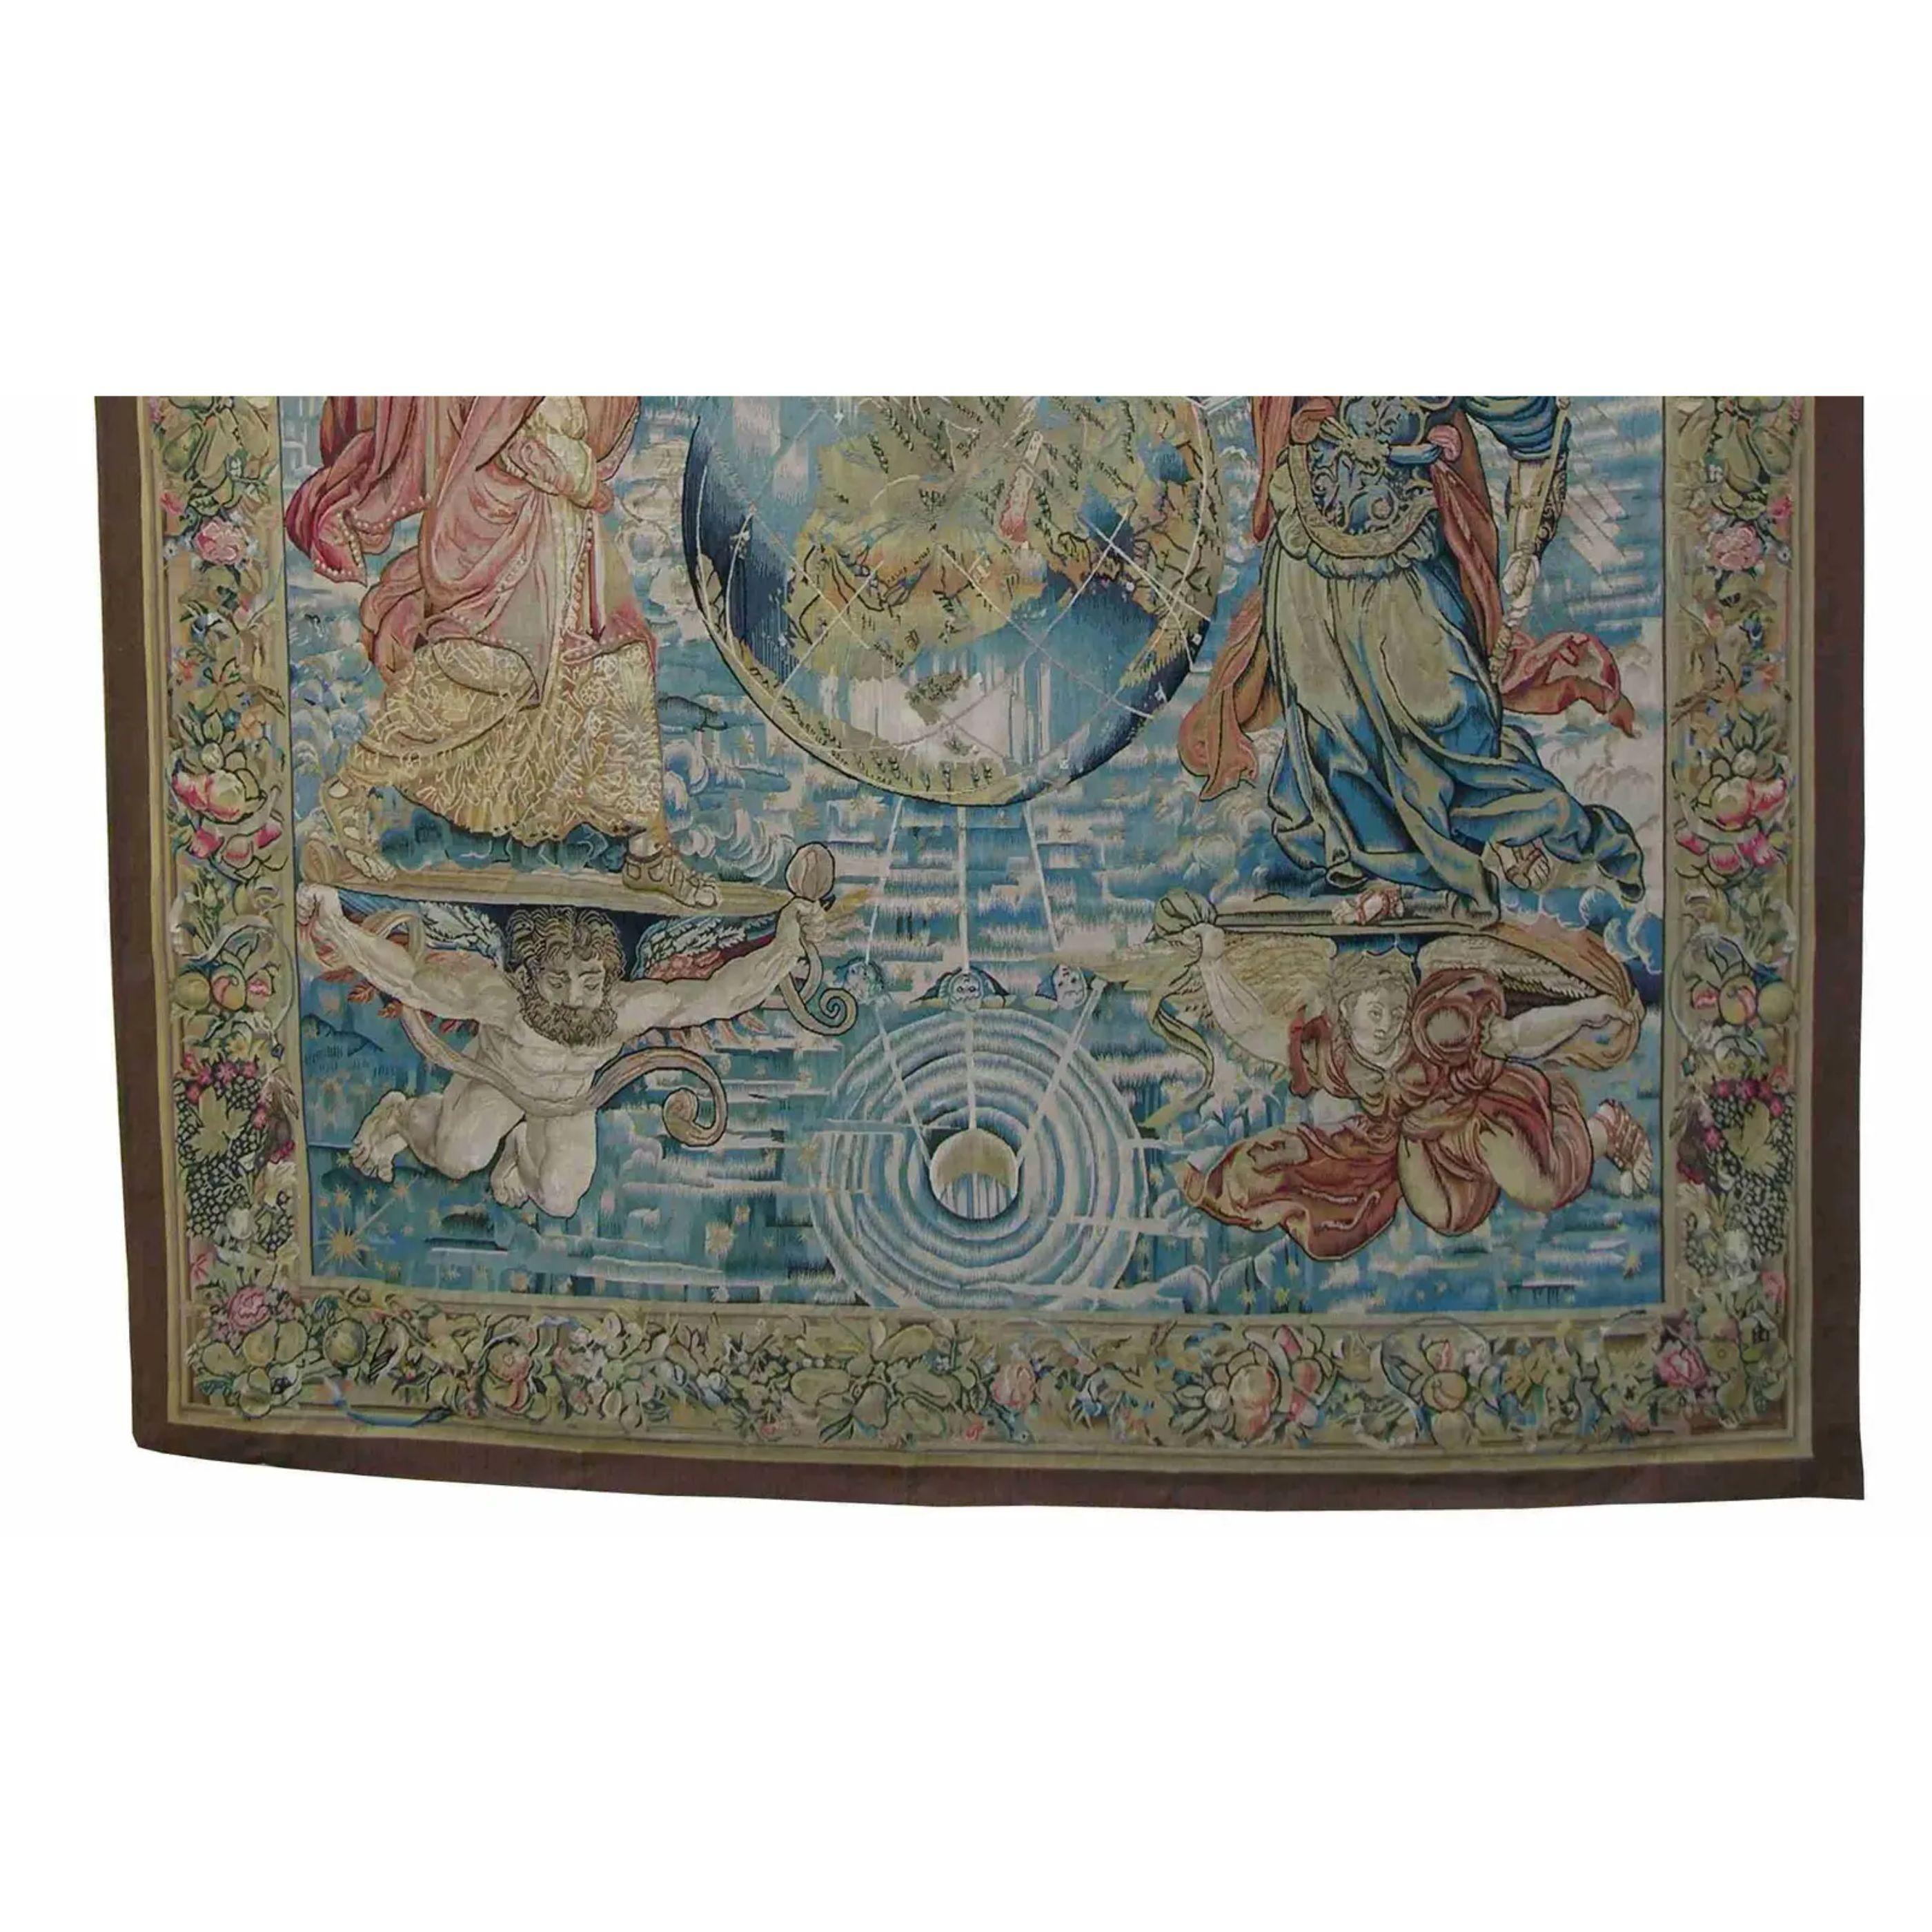 Unknown Vintage Tapestry Depicting Angels and Royal Figures 8.2X7.0 For Sale